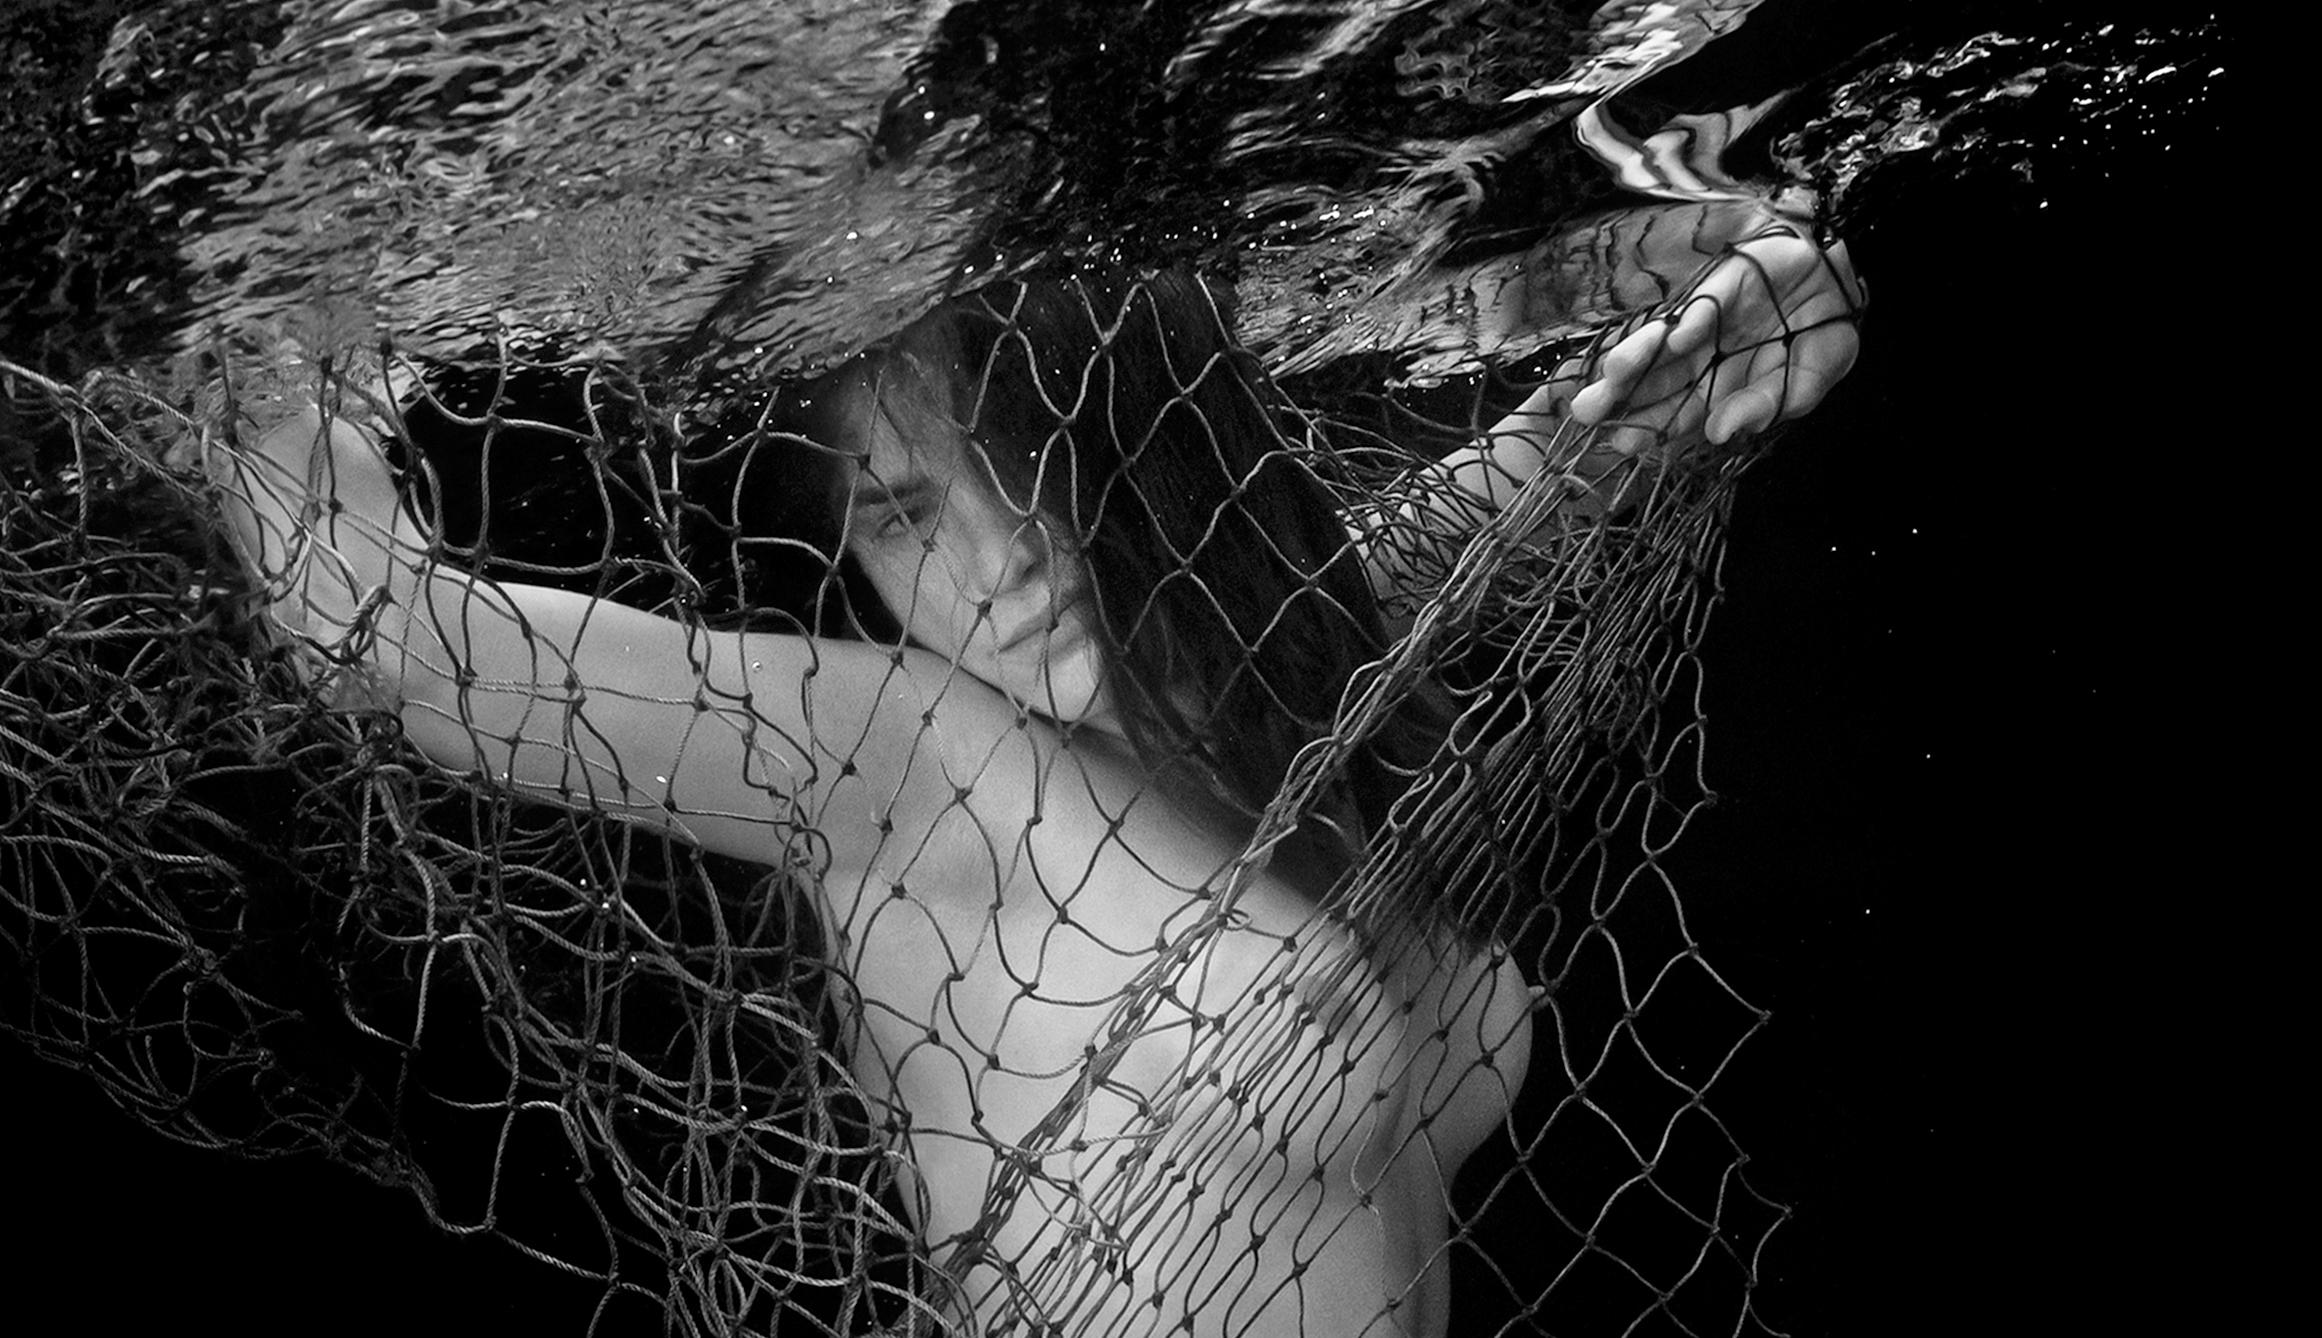 Miraculous Catch - underwater black&white nude photograph archival pigment 35x23 - Photograph by Alex Sher